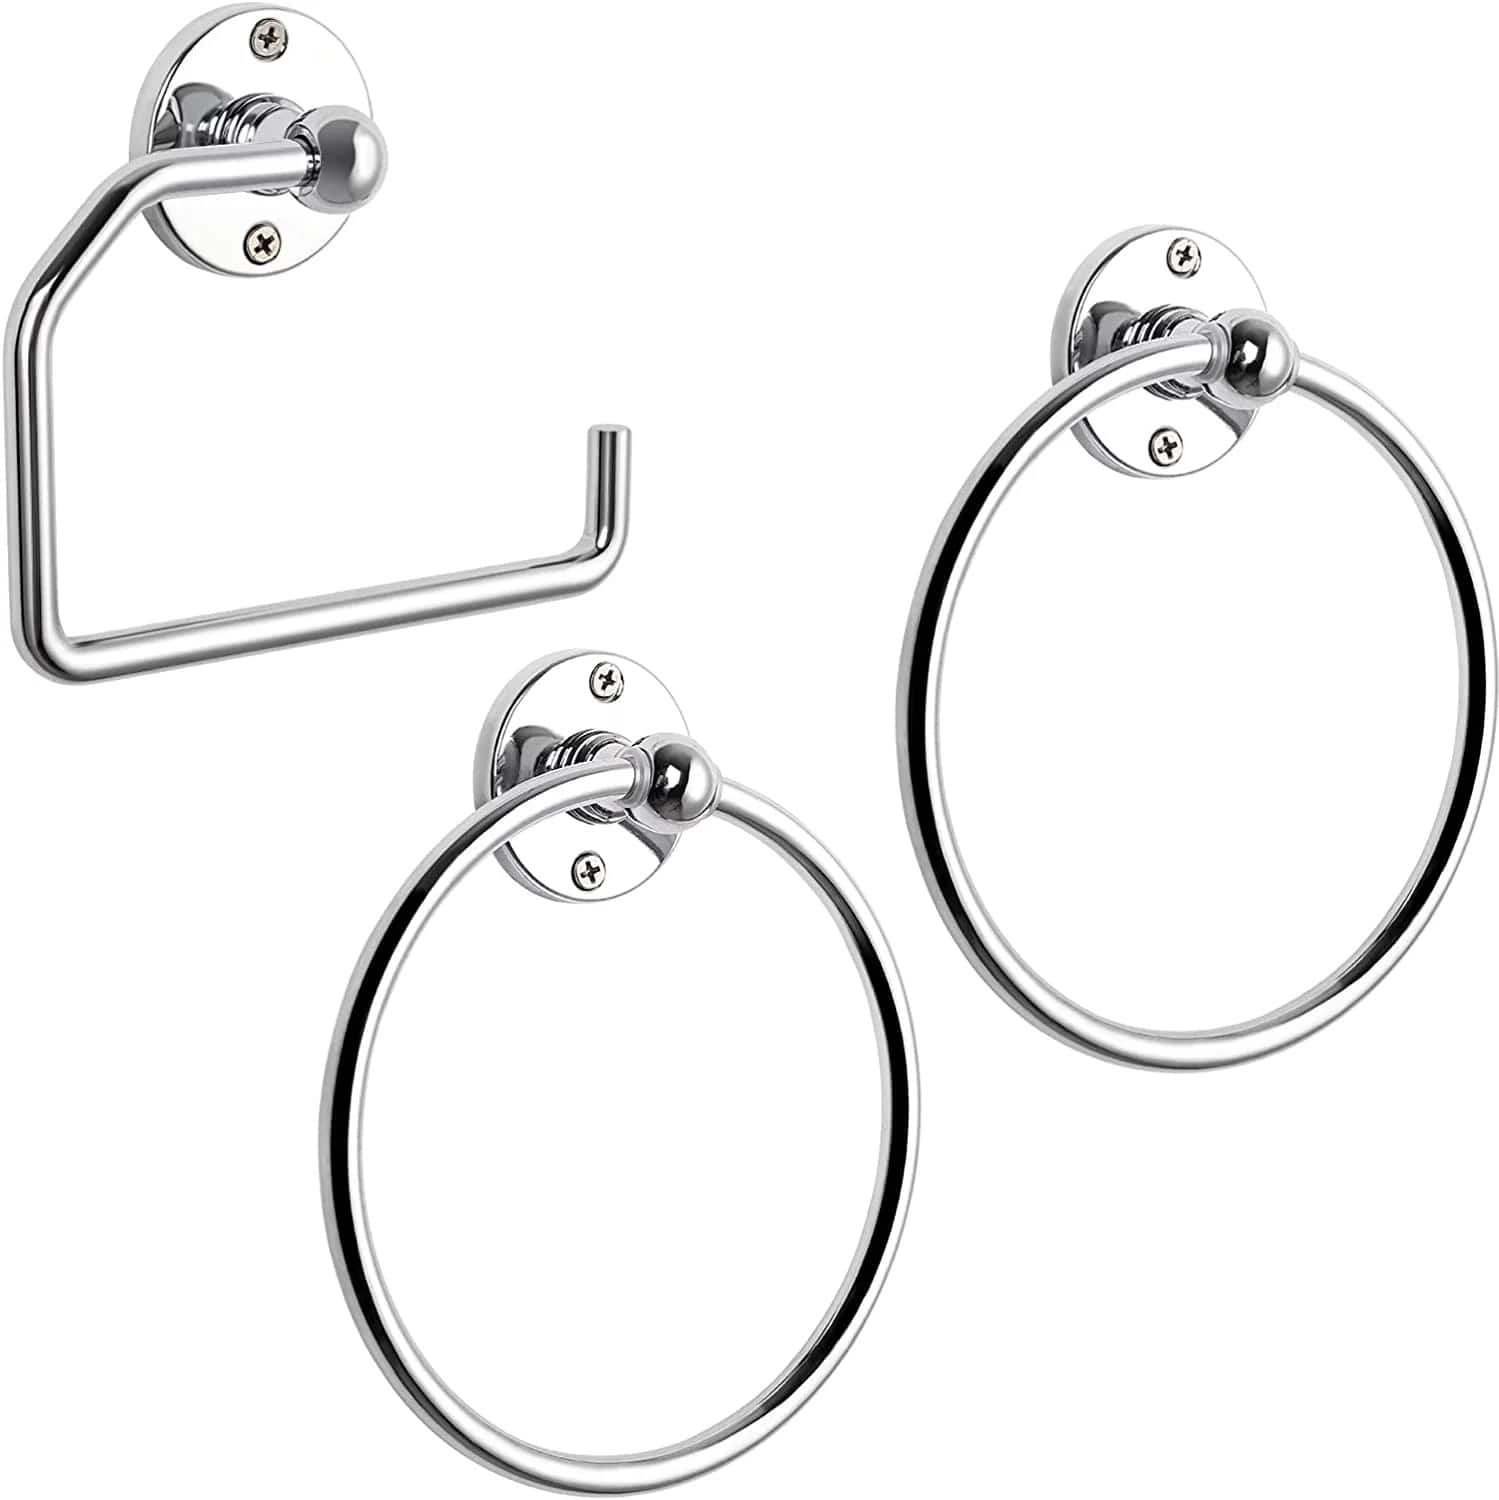 Hand Towel Ring  St Michel Bathroomware